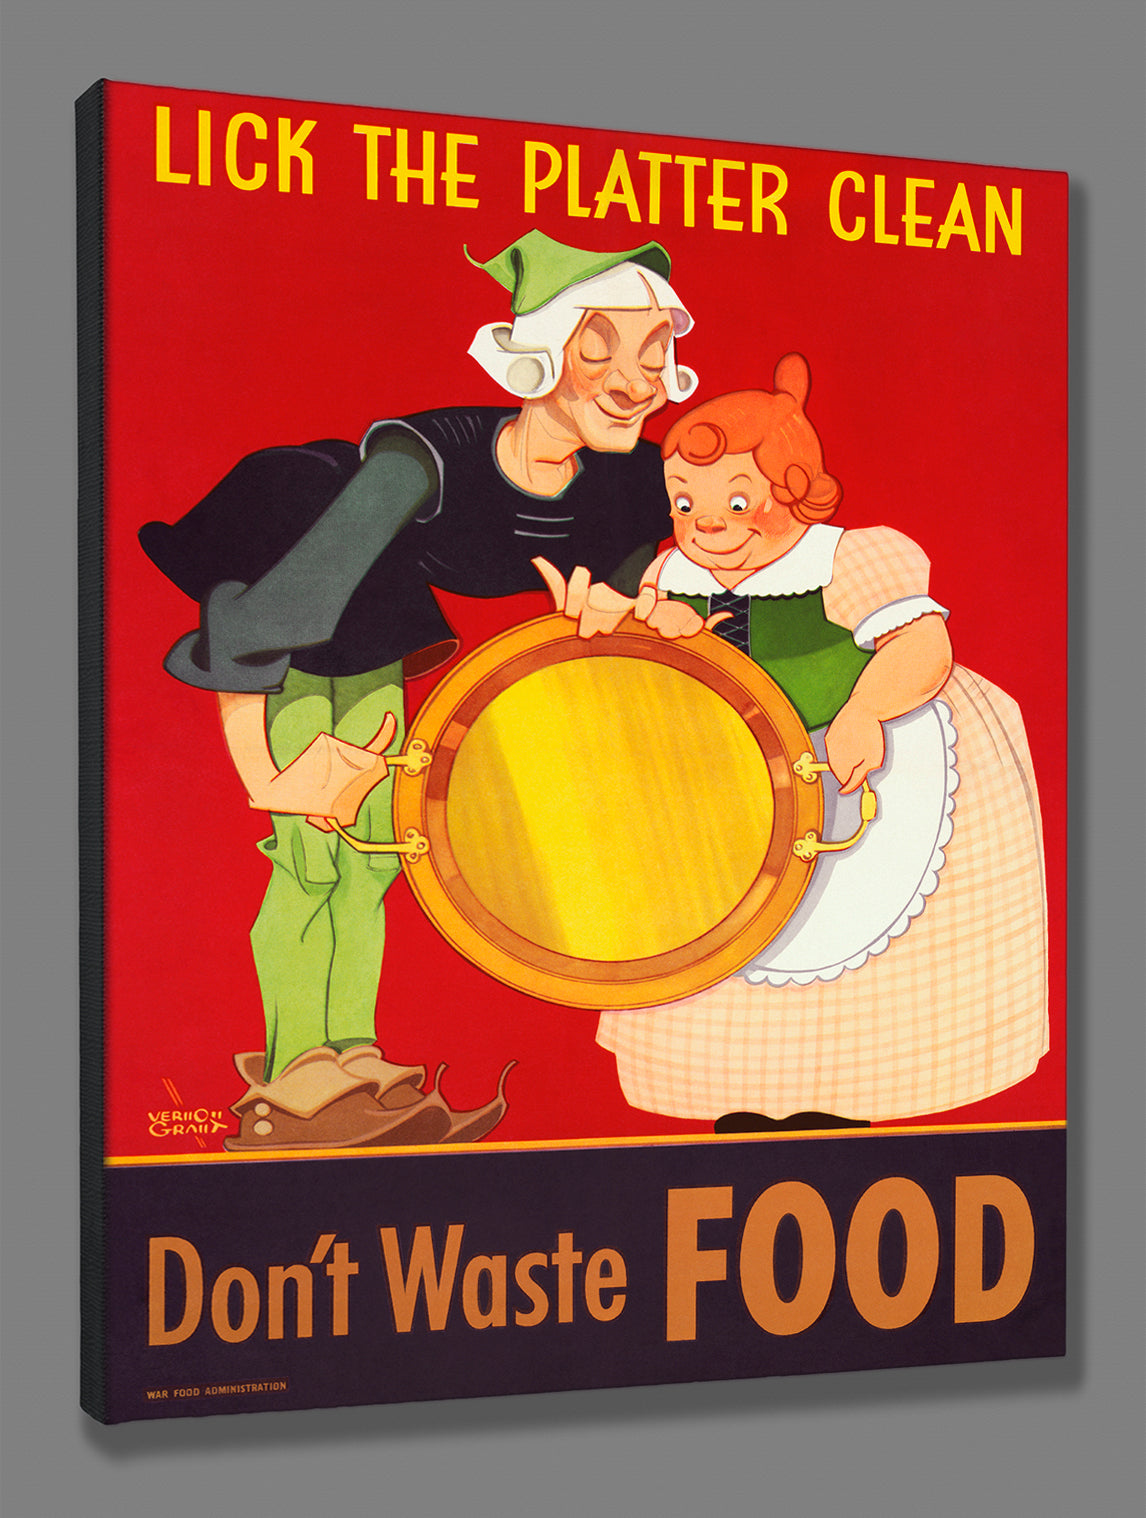 A canvas print of a vintage poster featuring the slogan "lick the platter clean" to minimize food waste